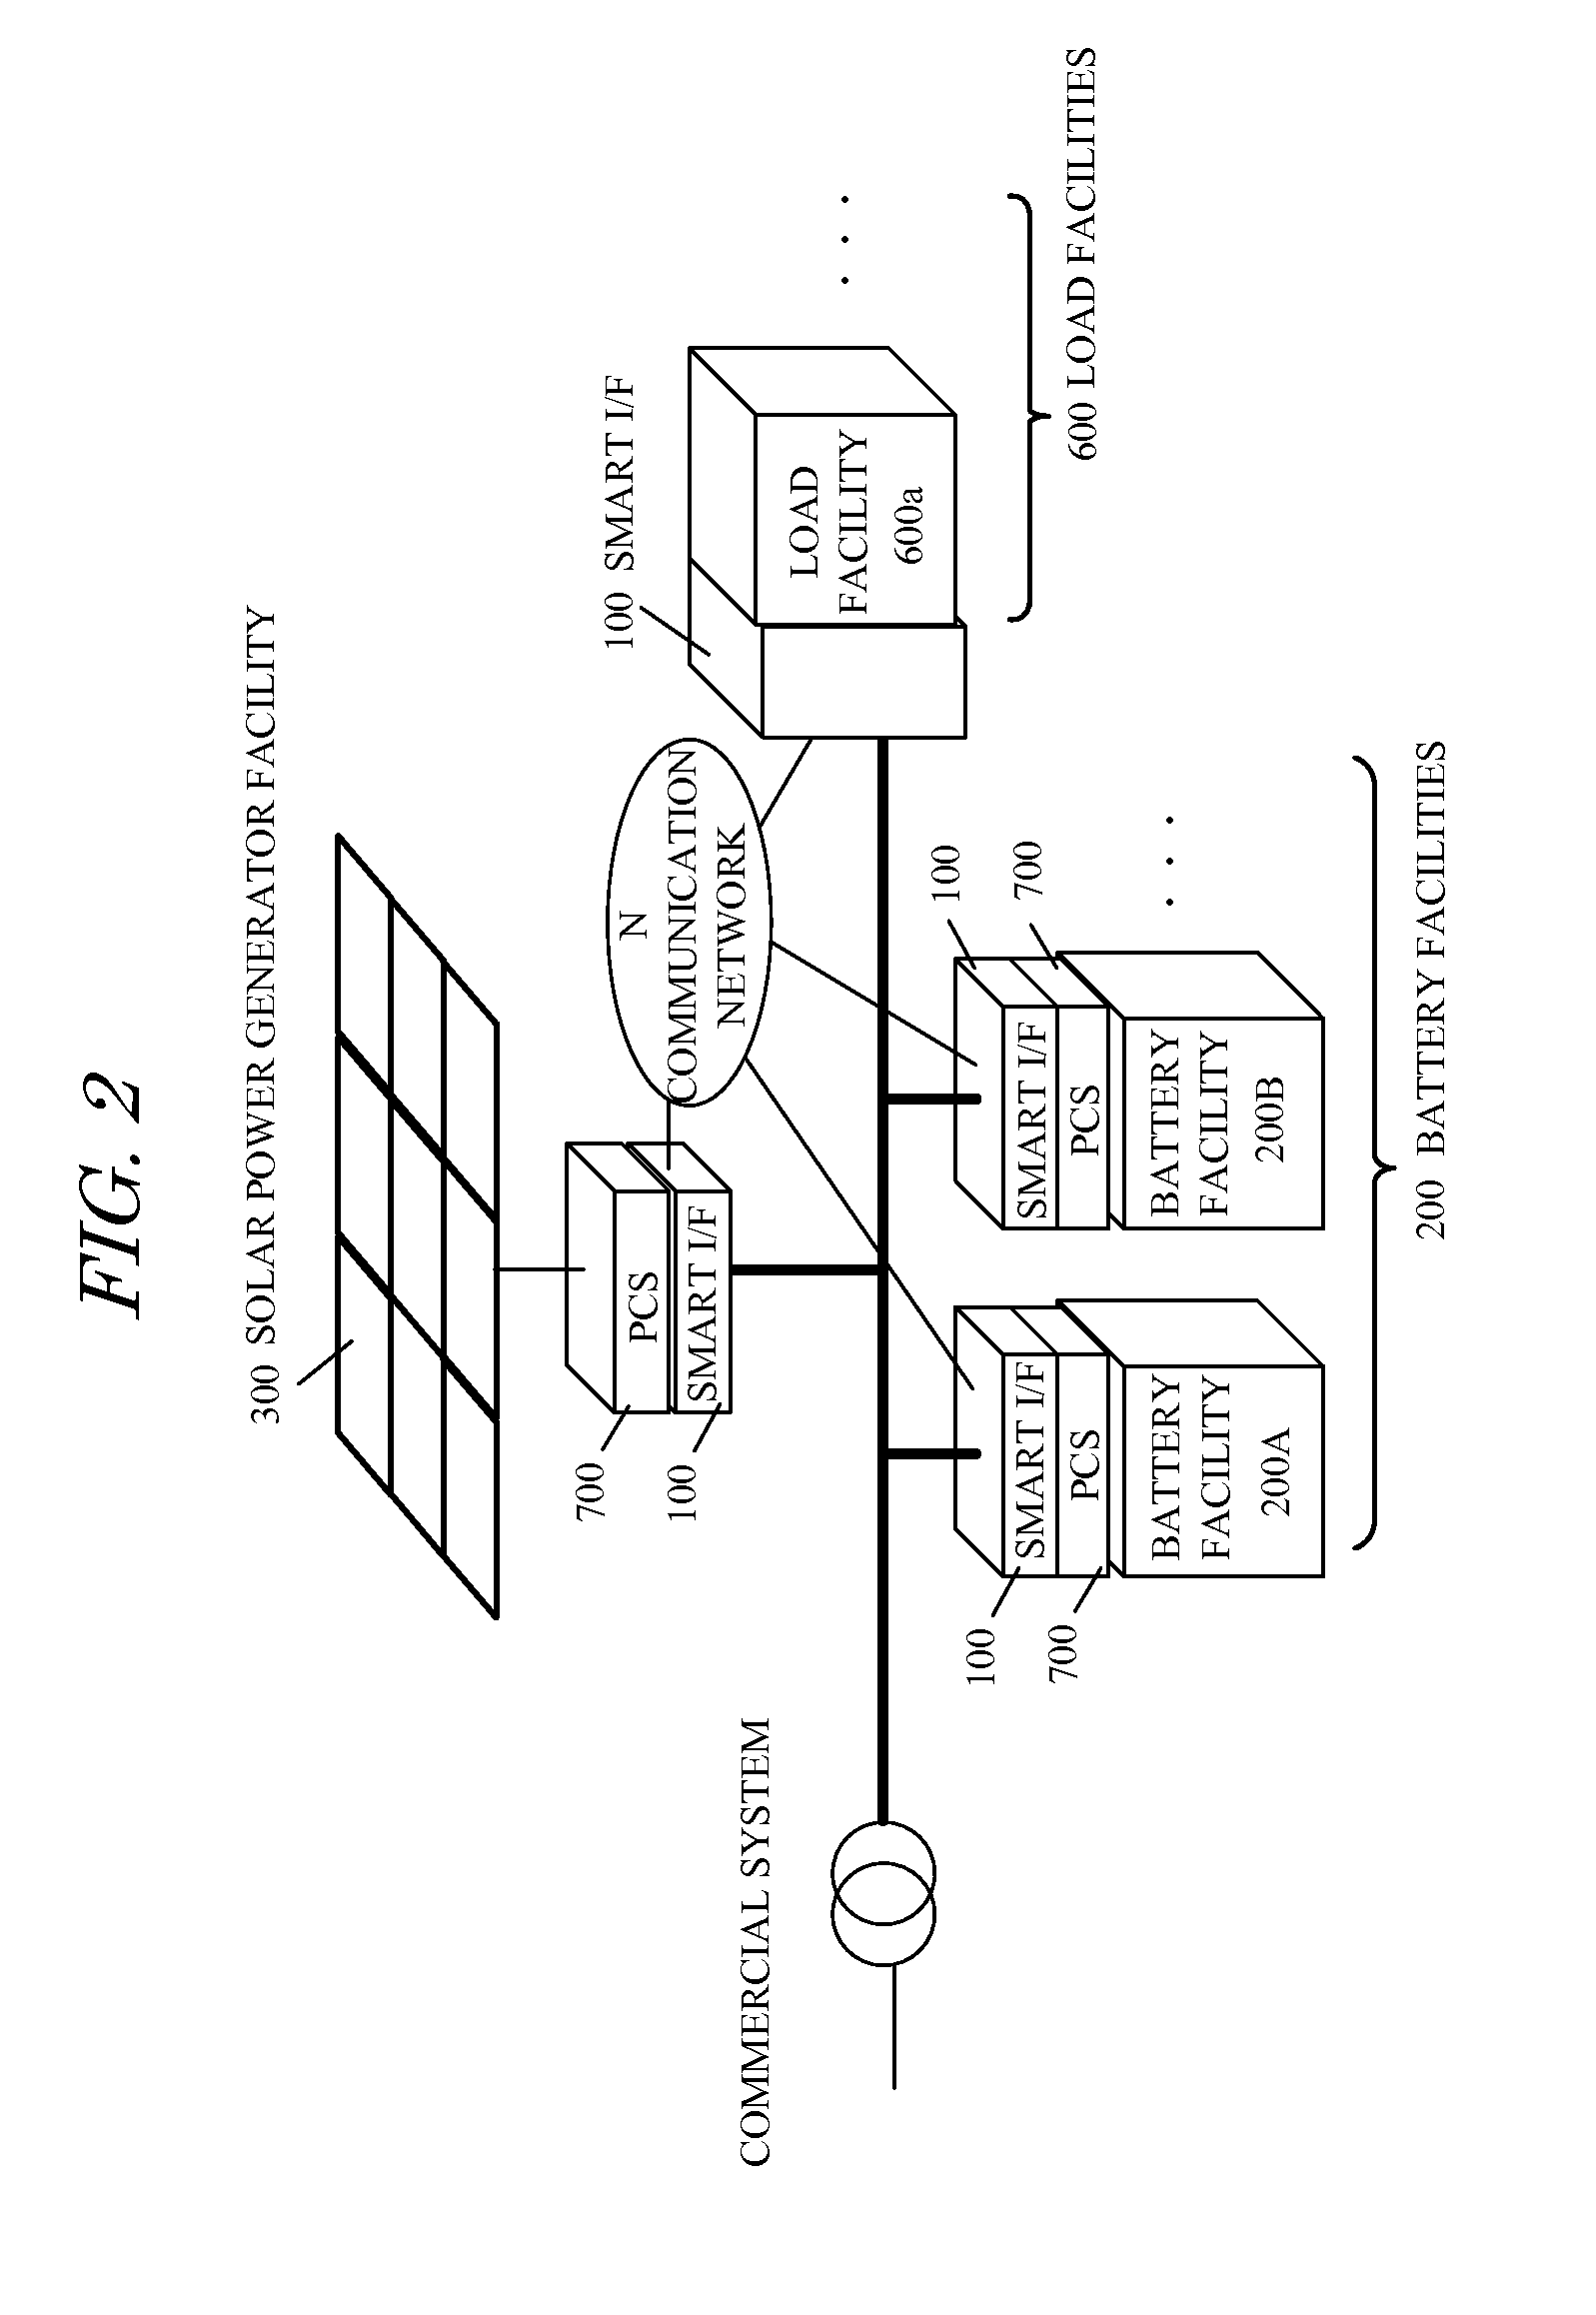 Film mirror, method for producing same, and sunlight reflecting mirror